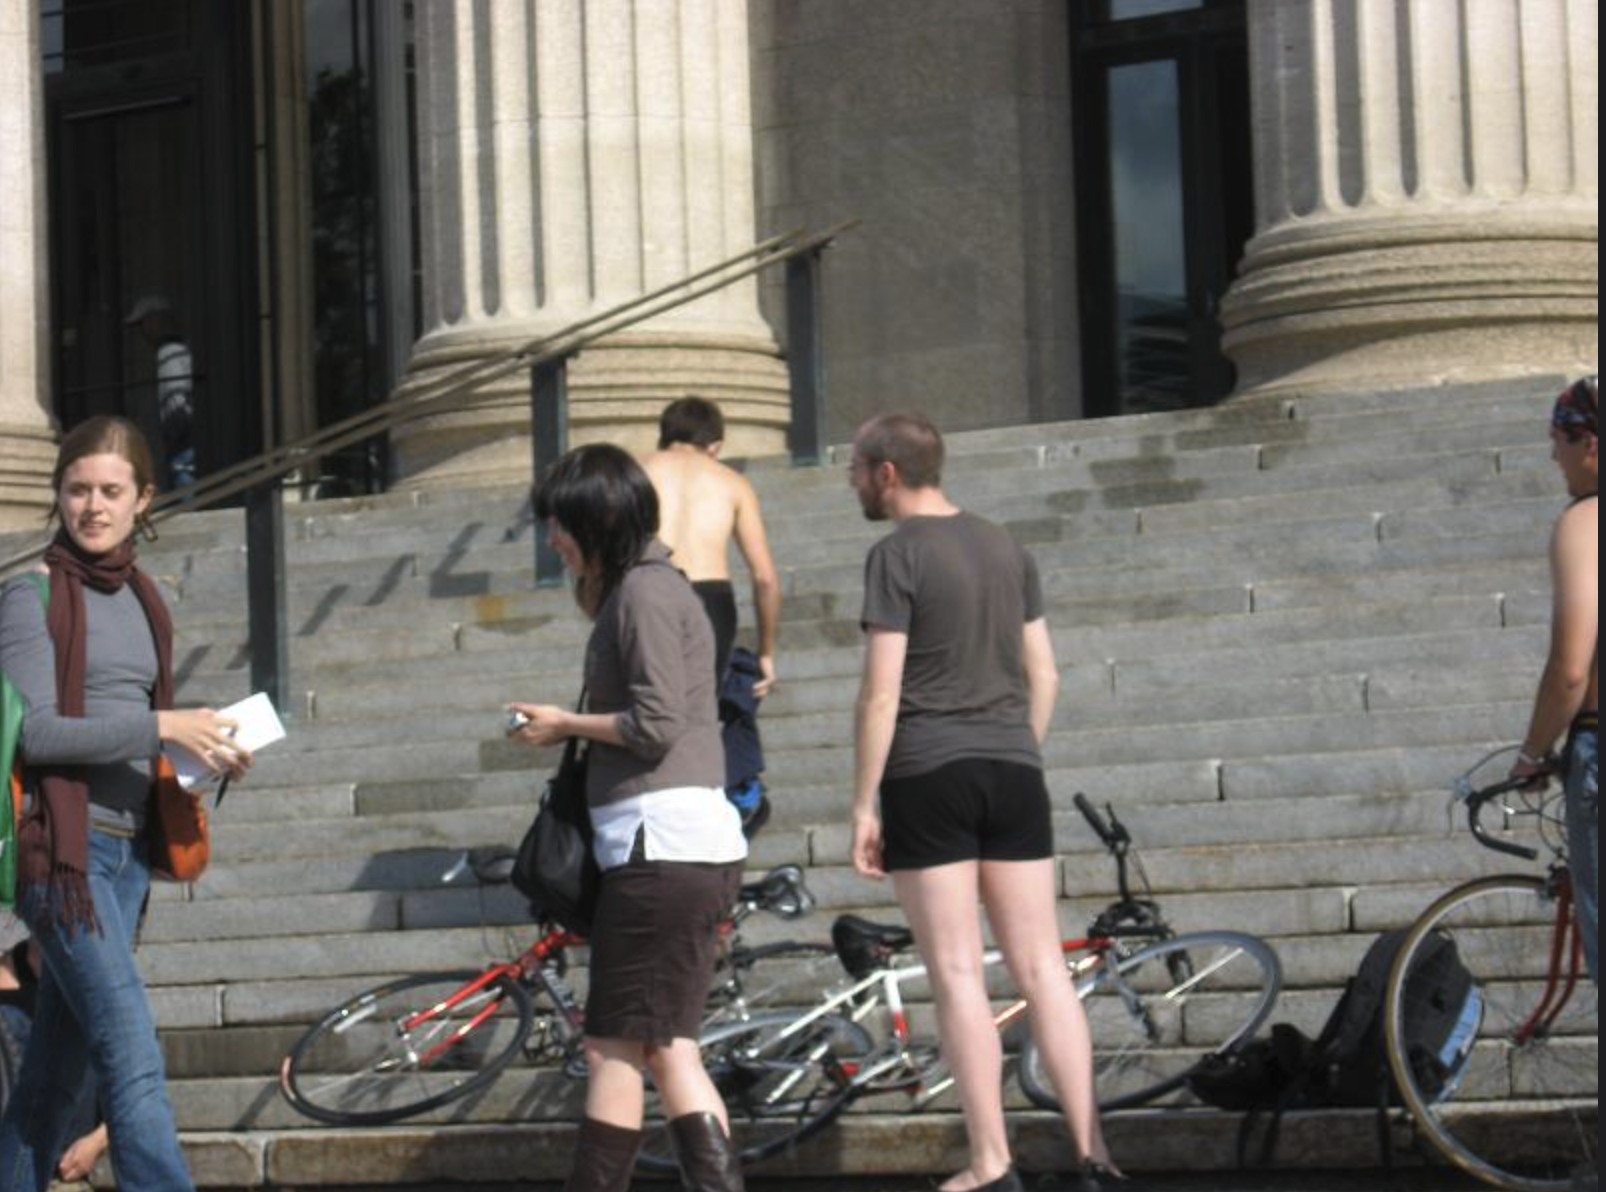 A photo of people in front of the steps of the Manitoba Legislative Building, with bikes laid on the steps